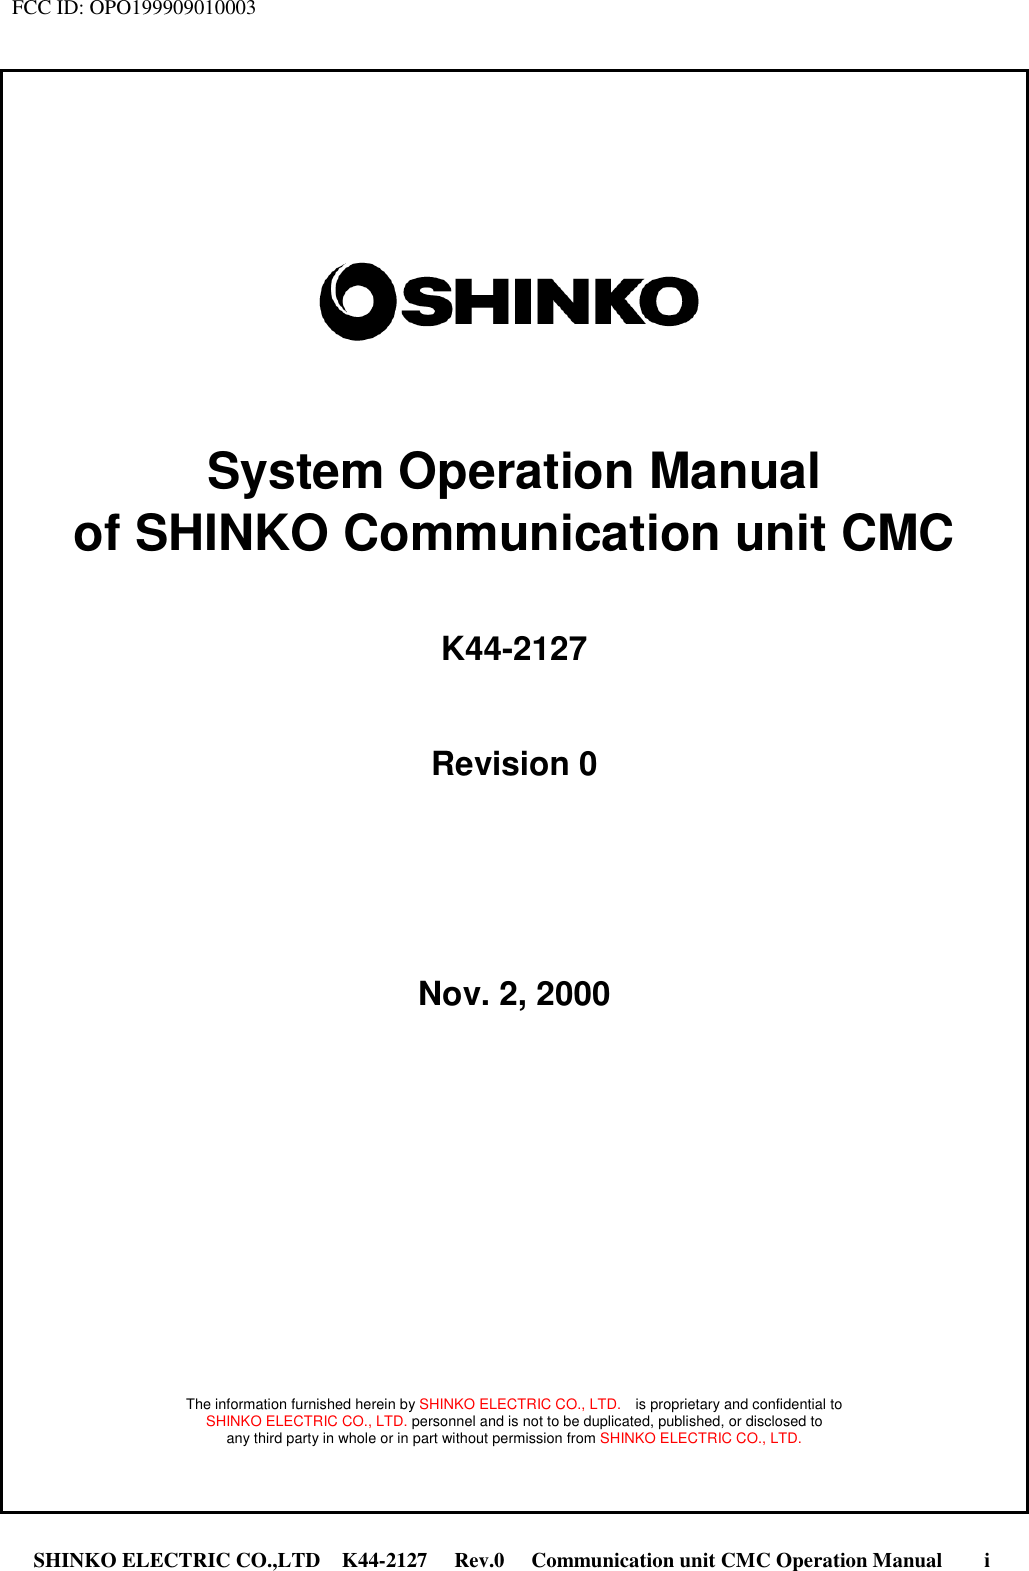 FCC ID: OPO199909010003 SHINKO ELECTRIC CO.,LTD K44-2127   Rev.0   Communication unit CMC Operation Manual     iSystem Operation Manualof SHINKO Communication unit CMCK44-2127Revision 0Nov. 2, 2000The information furnished herein by SHINKO ELECTRIC CO., LTD.    is proprietary and confidential toSHINKO ELECTRIC CO., LTD. personnel and is not to be duplicated, published, or disclosed toany third party in whole or in part without permission from SHINKO ELECTRIC CO., LTD.